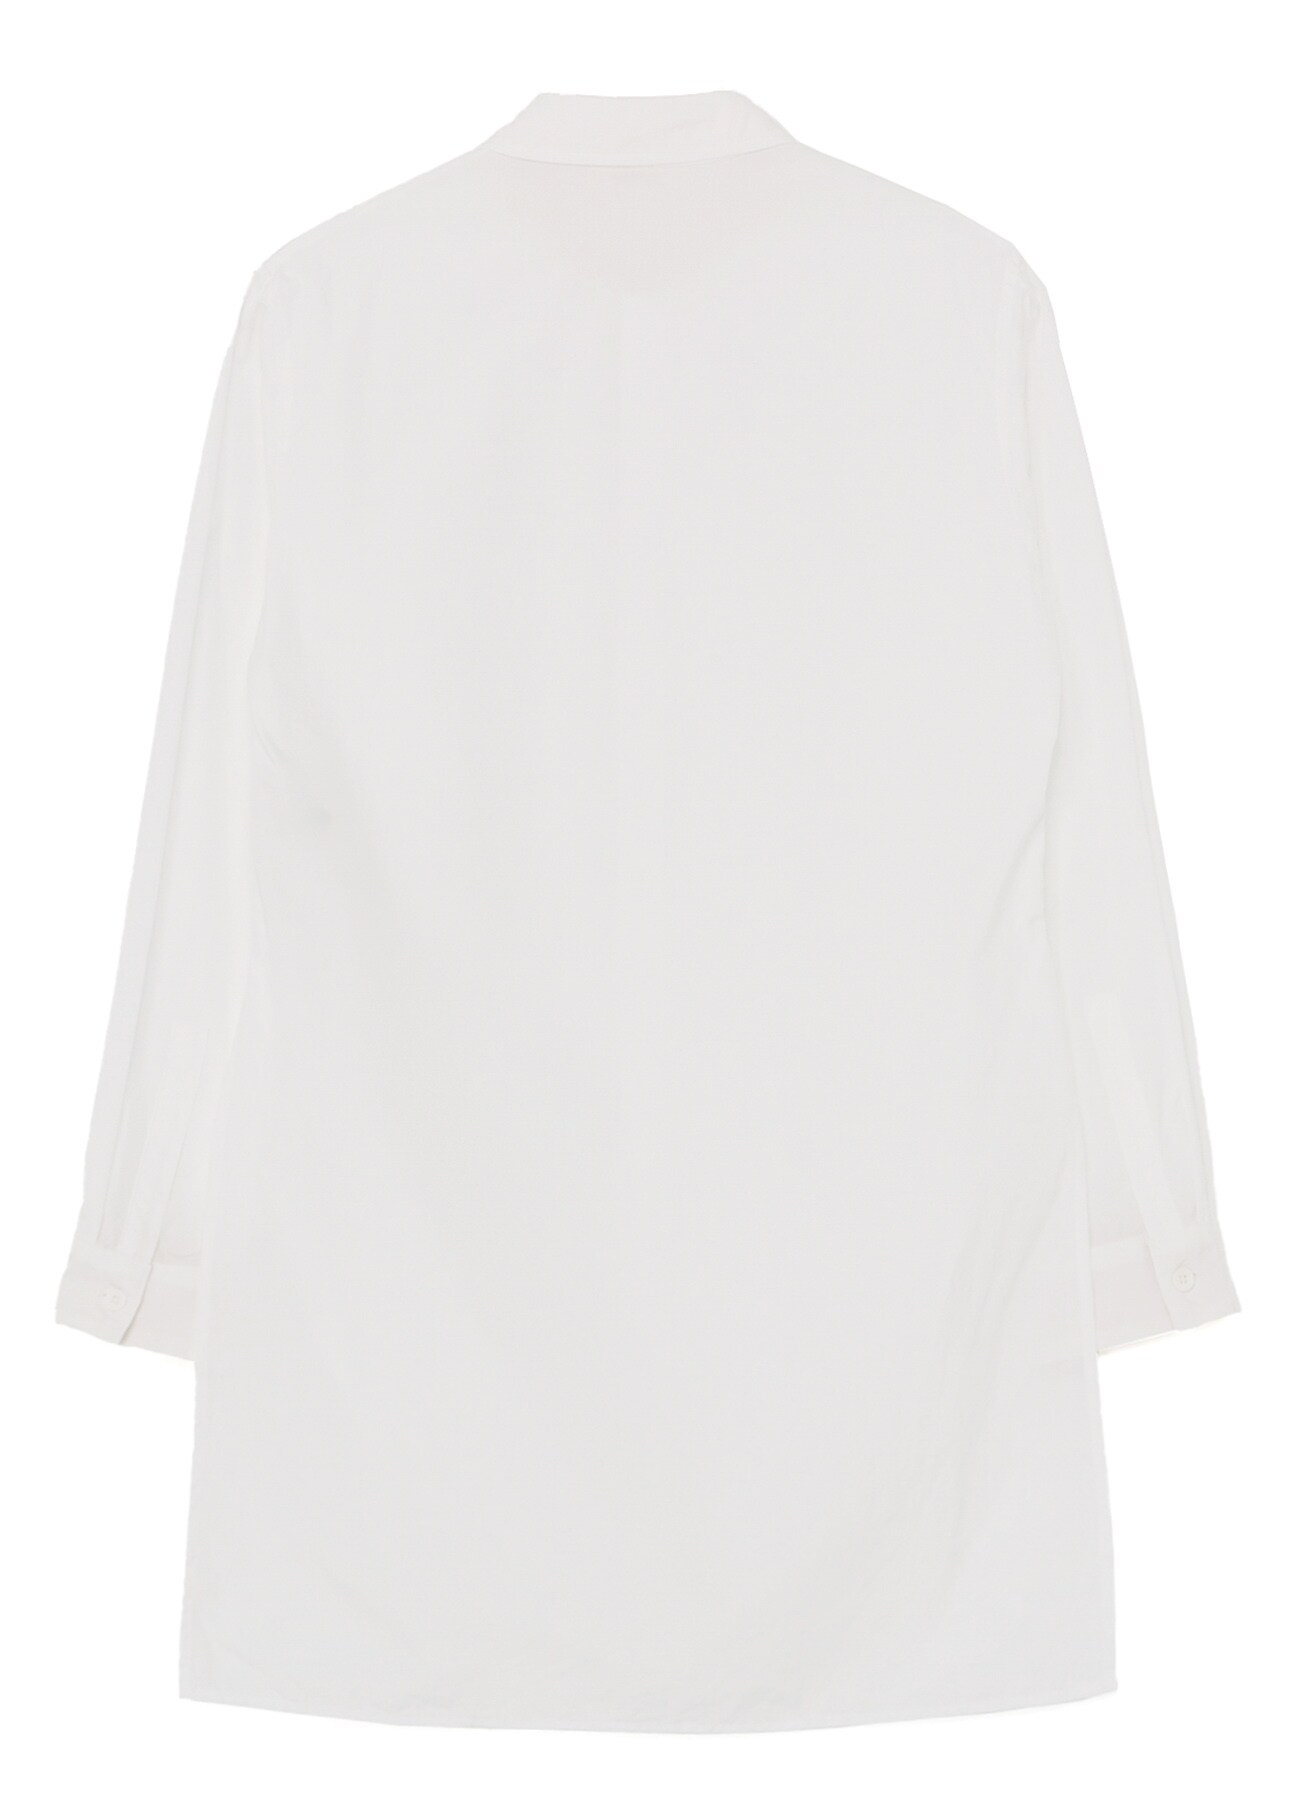 C/BROAD FRONT SLEEVE CURVE SHIRT